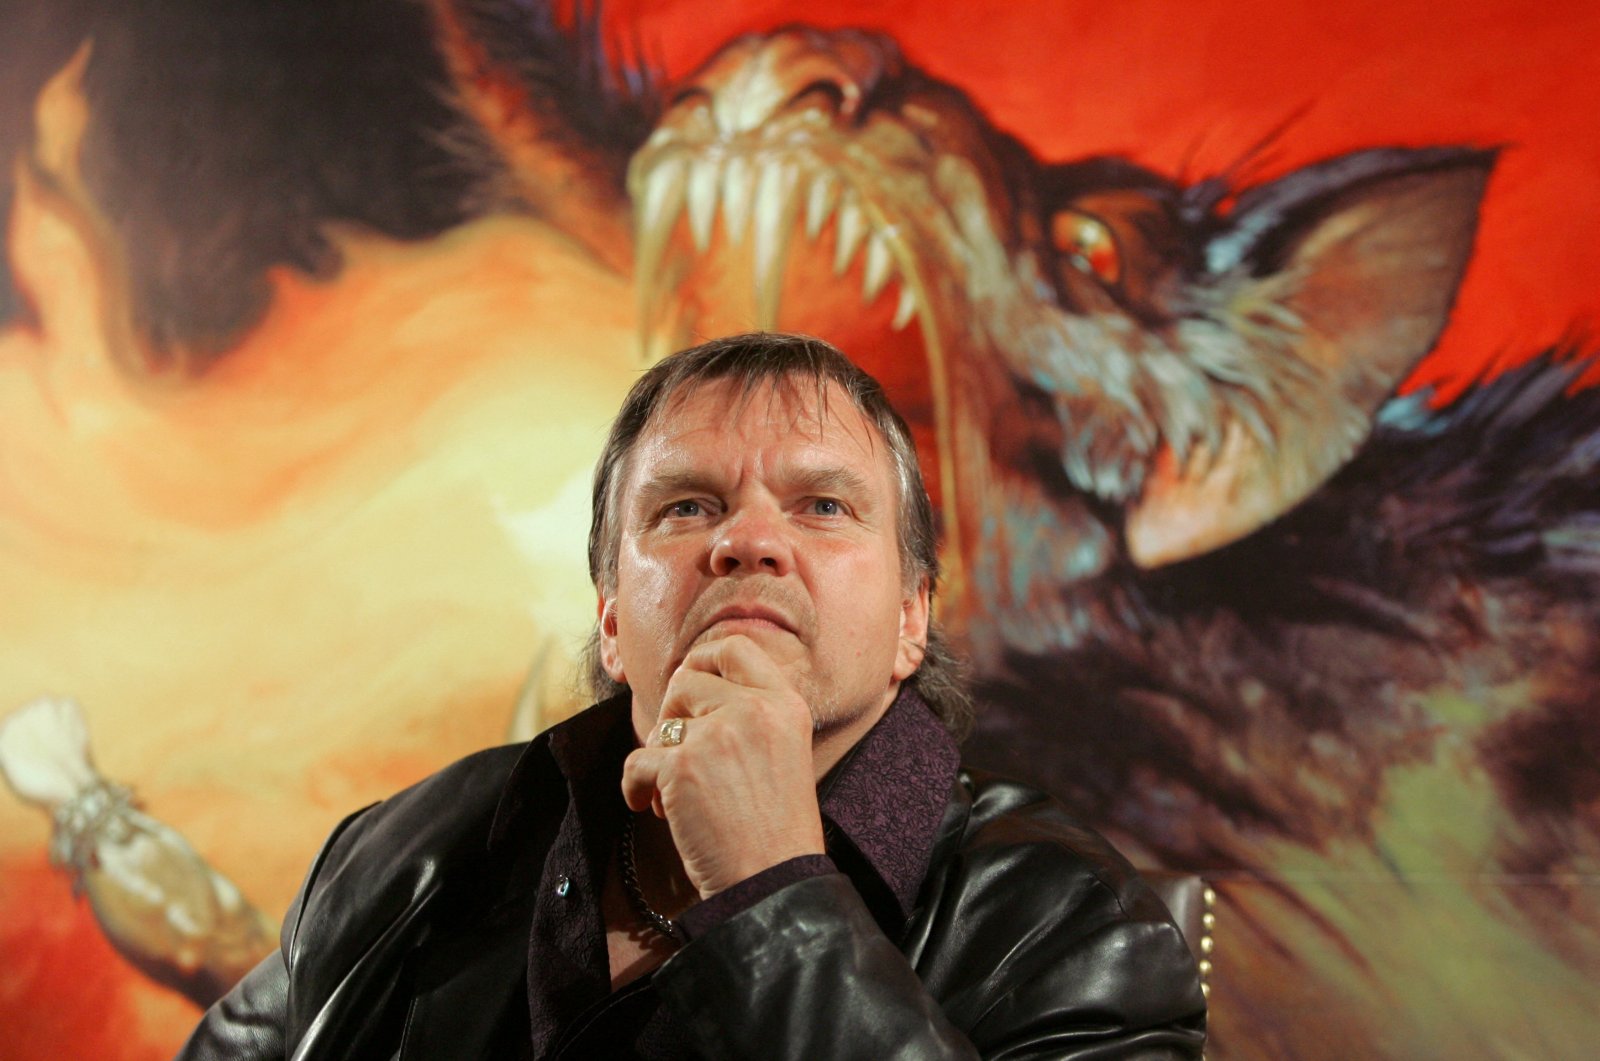 U.S. rock and roll singer Meat Loaf attends a news conference promoting his latest album &quot;Bat Out of Hell III: The Monster Is Loose&quot; in Hong Kong, Sept. 4, 2006. (Reuters Photo)